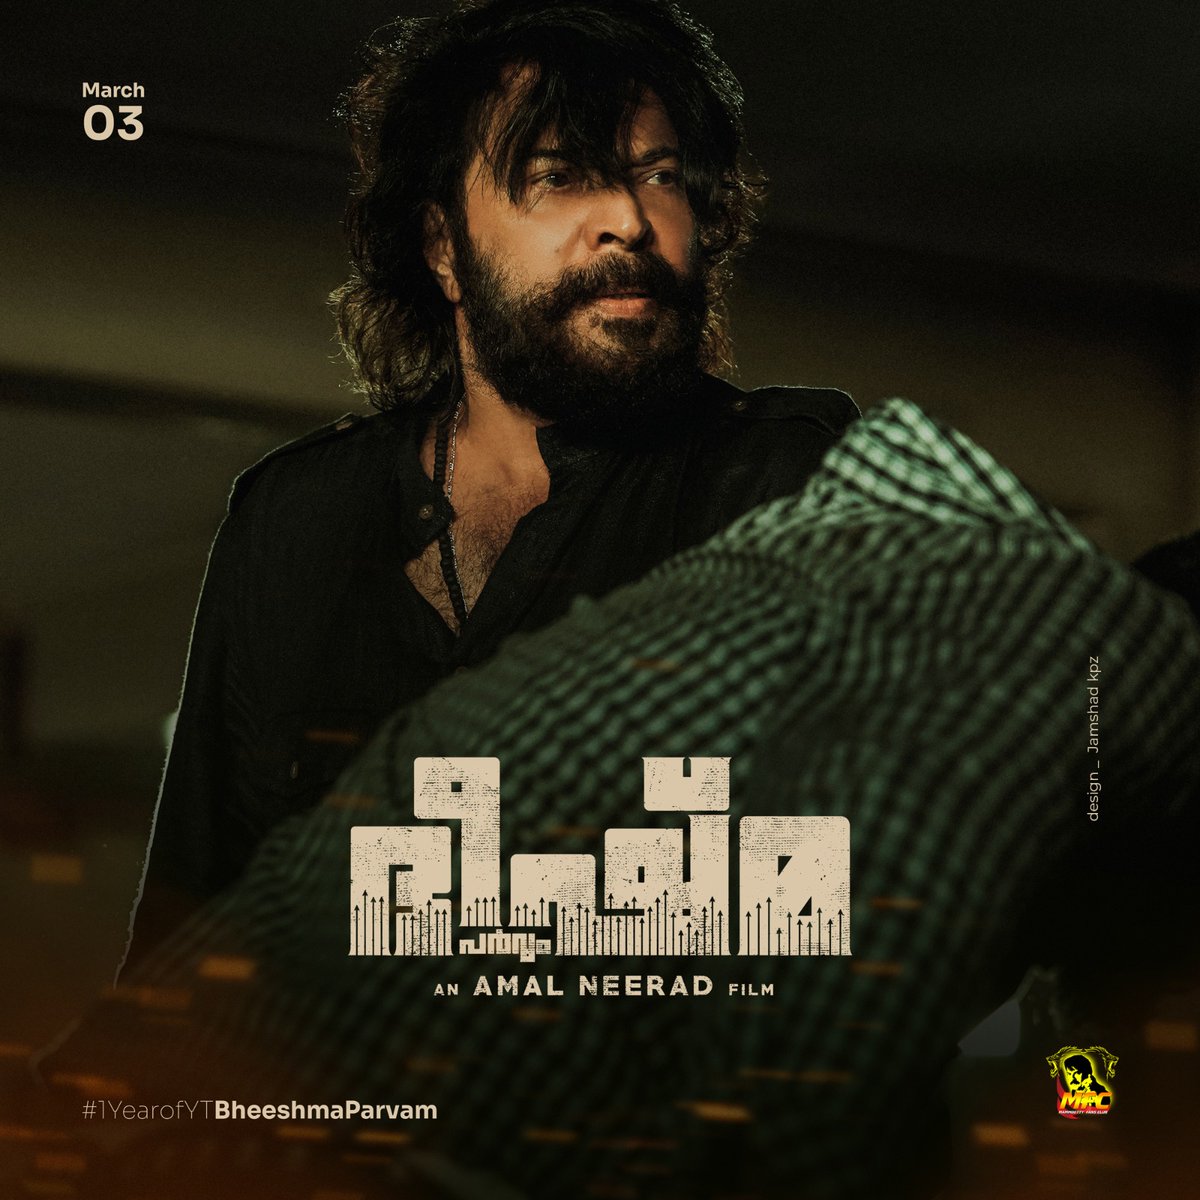 It's been an year since Michael came and singlehandedly setted the box office on fire. From the firstlook to the final output , the hype for BheeshmaParvam was surreal and the records created by the movie are a reflection.

#1YearOfYTBheeshmaParvam
#Mammootty @mammukka https://t.co/i5OeSBQLP5